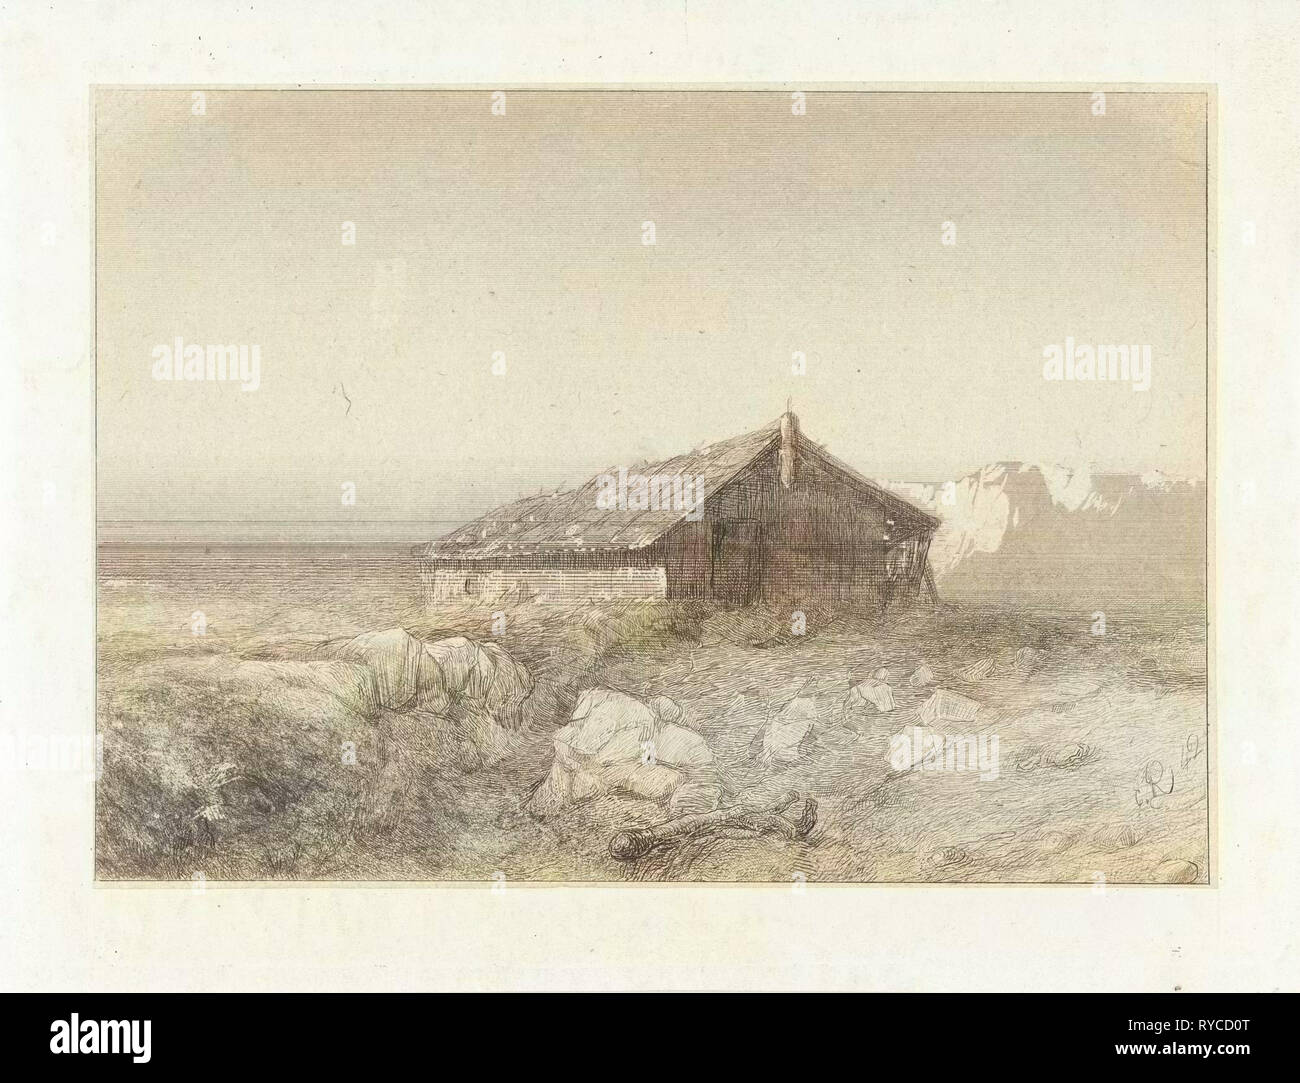 Plain with a hut, Charles Rochussen, 1842 Stock Photo